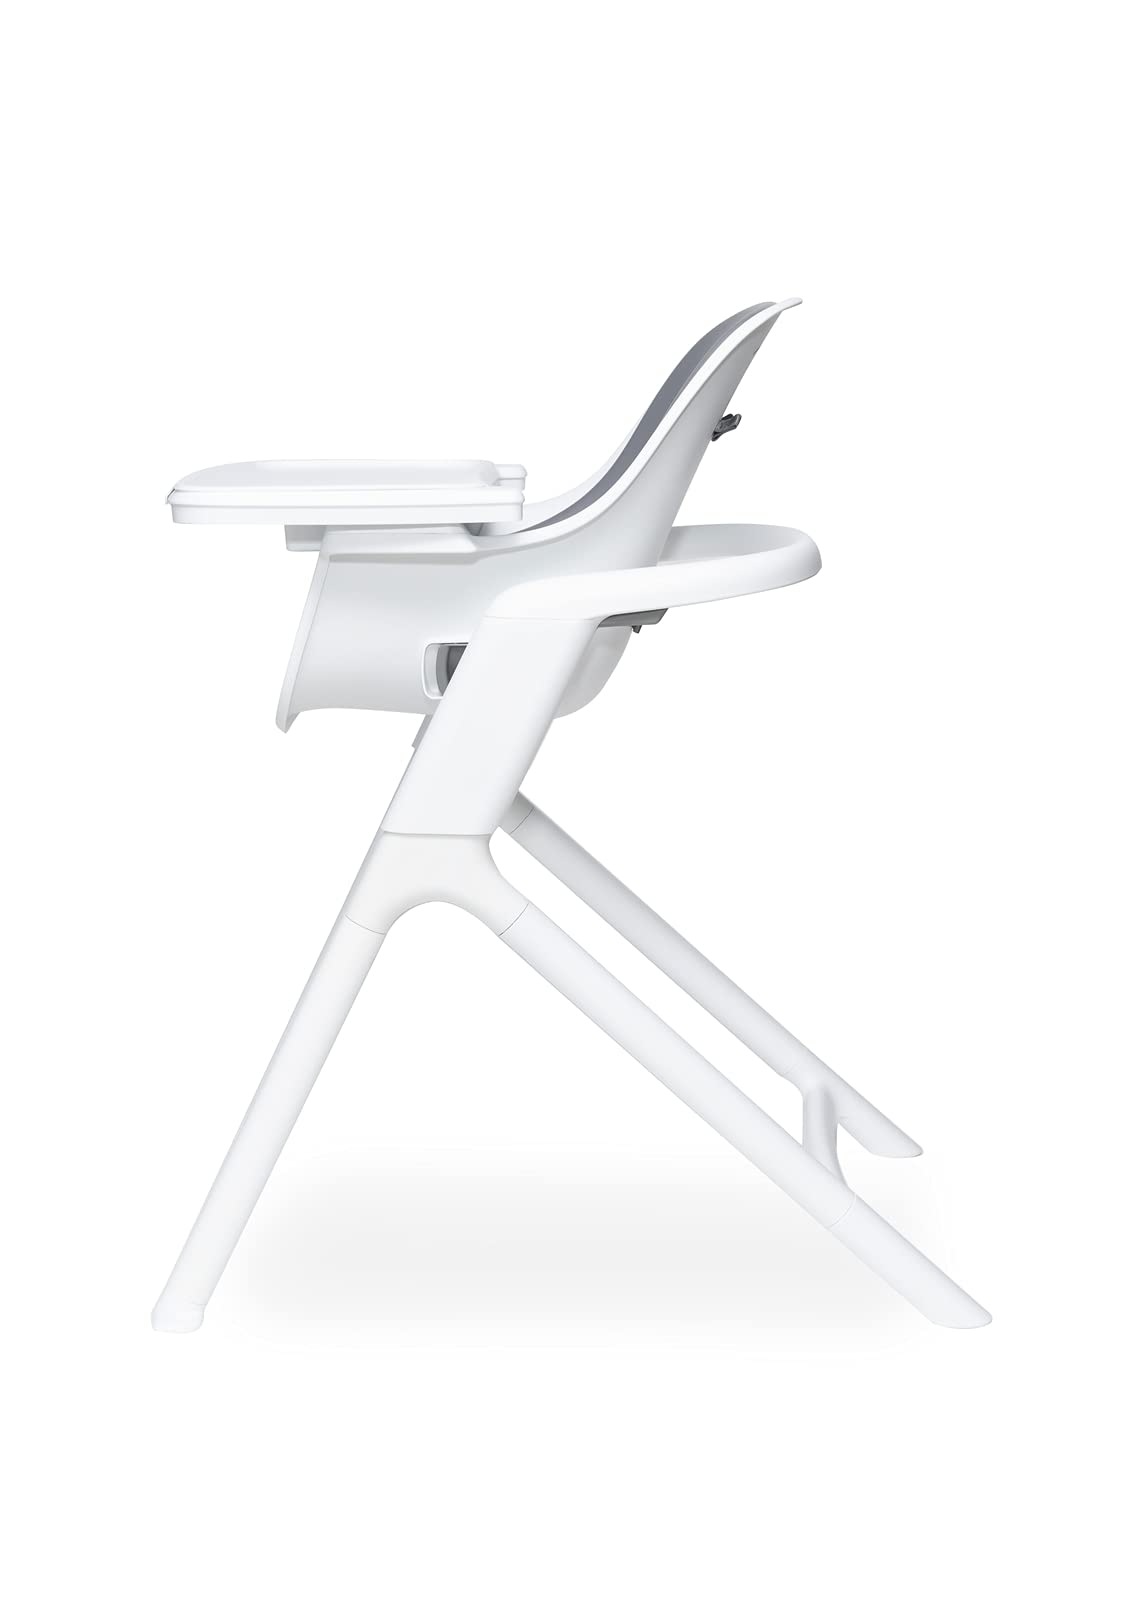 4moms Connect High Chair, One-Handed Magnetic Tray Attachment, White/Grey